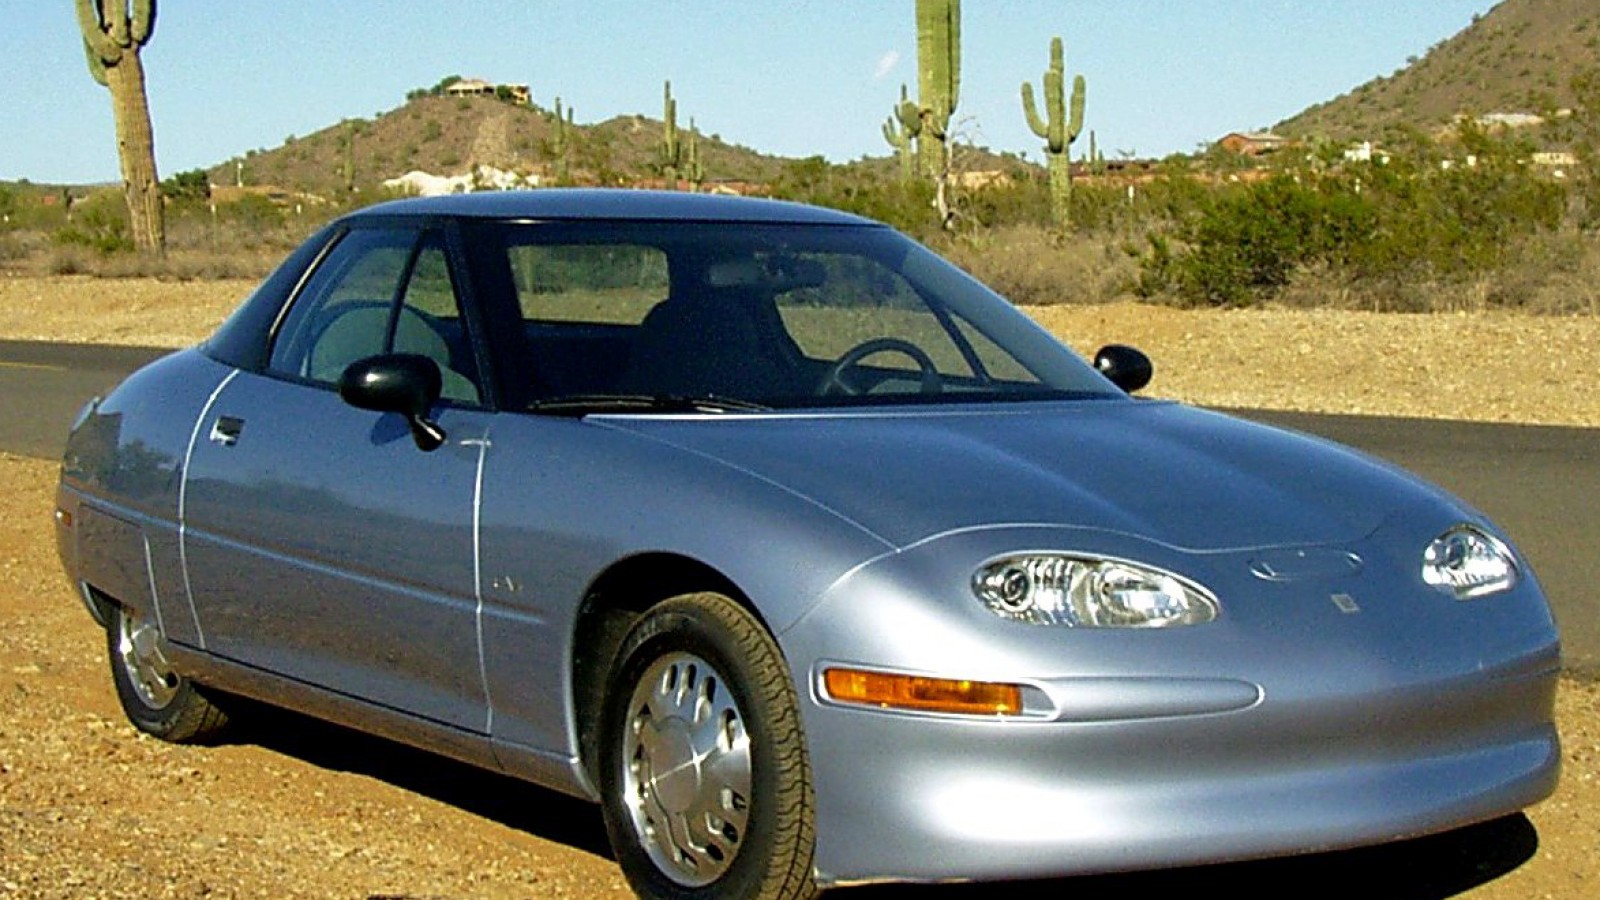 10 classic electric cars you never knew existed - General Motors EV1 2